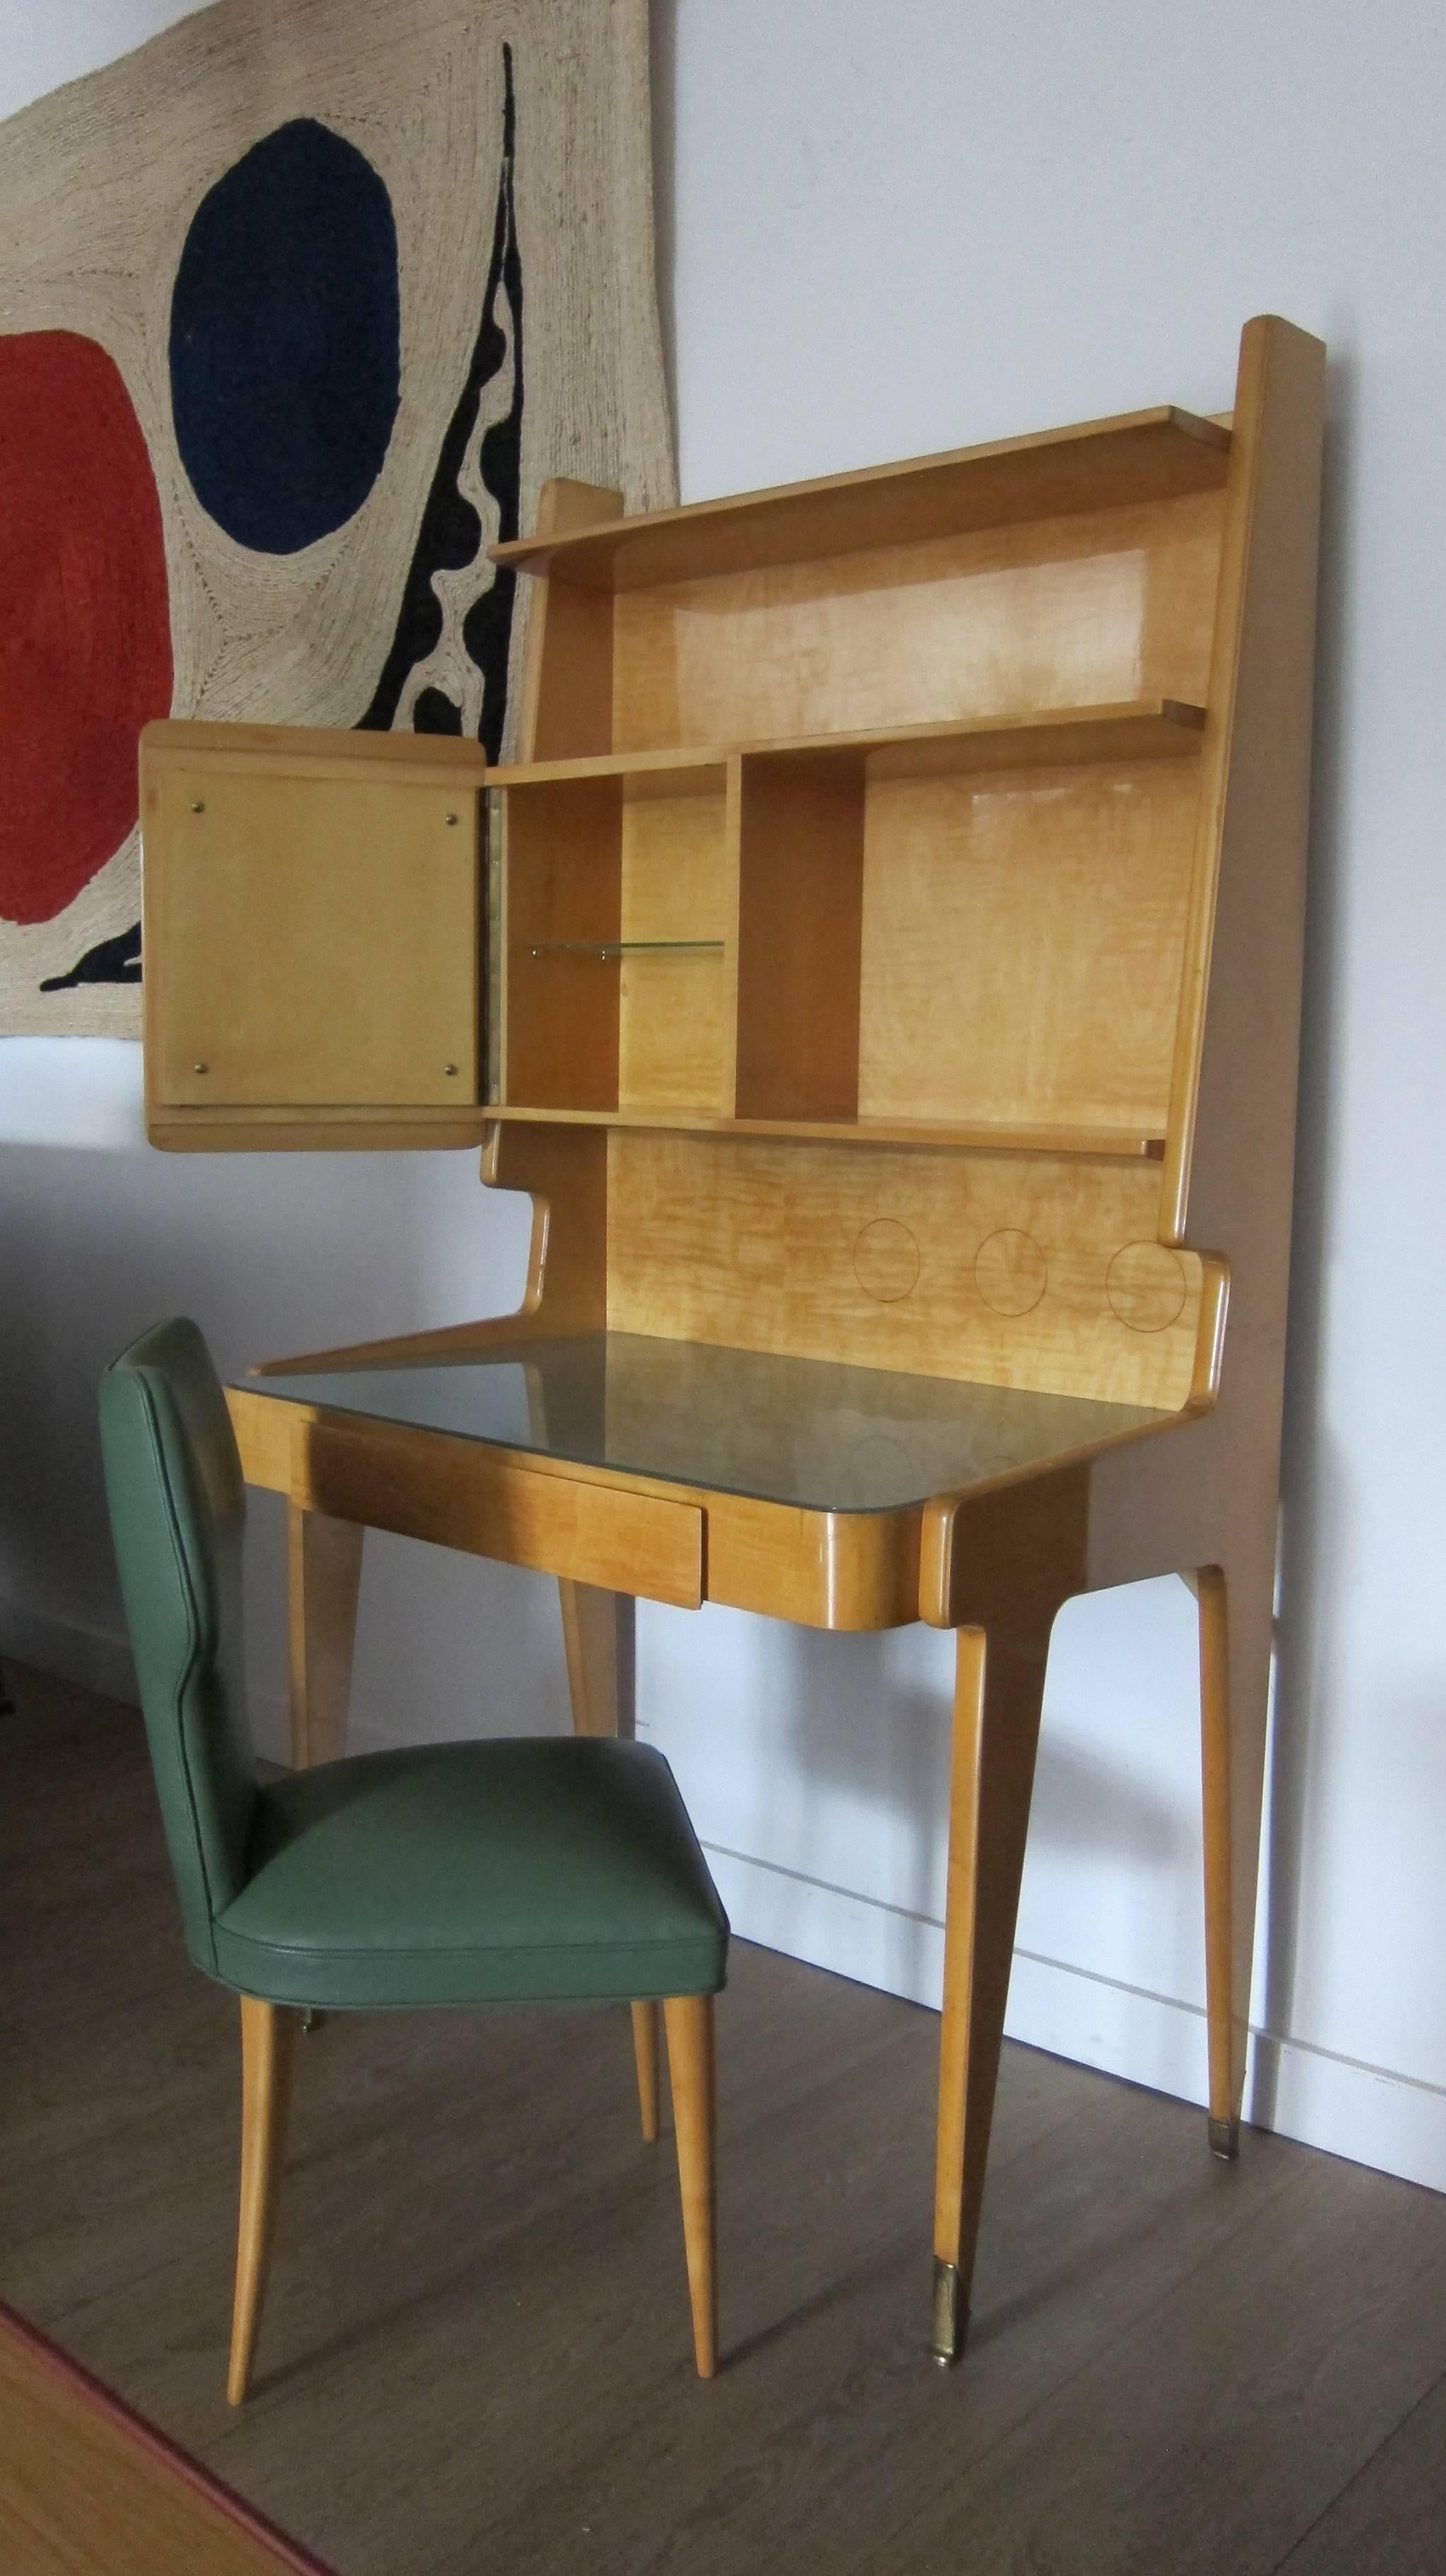 Italian 1950s Gio Ponti Style Upright Desk with Chair. 3